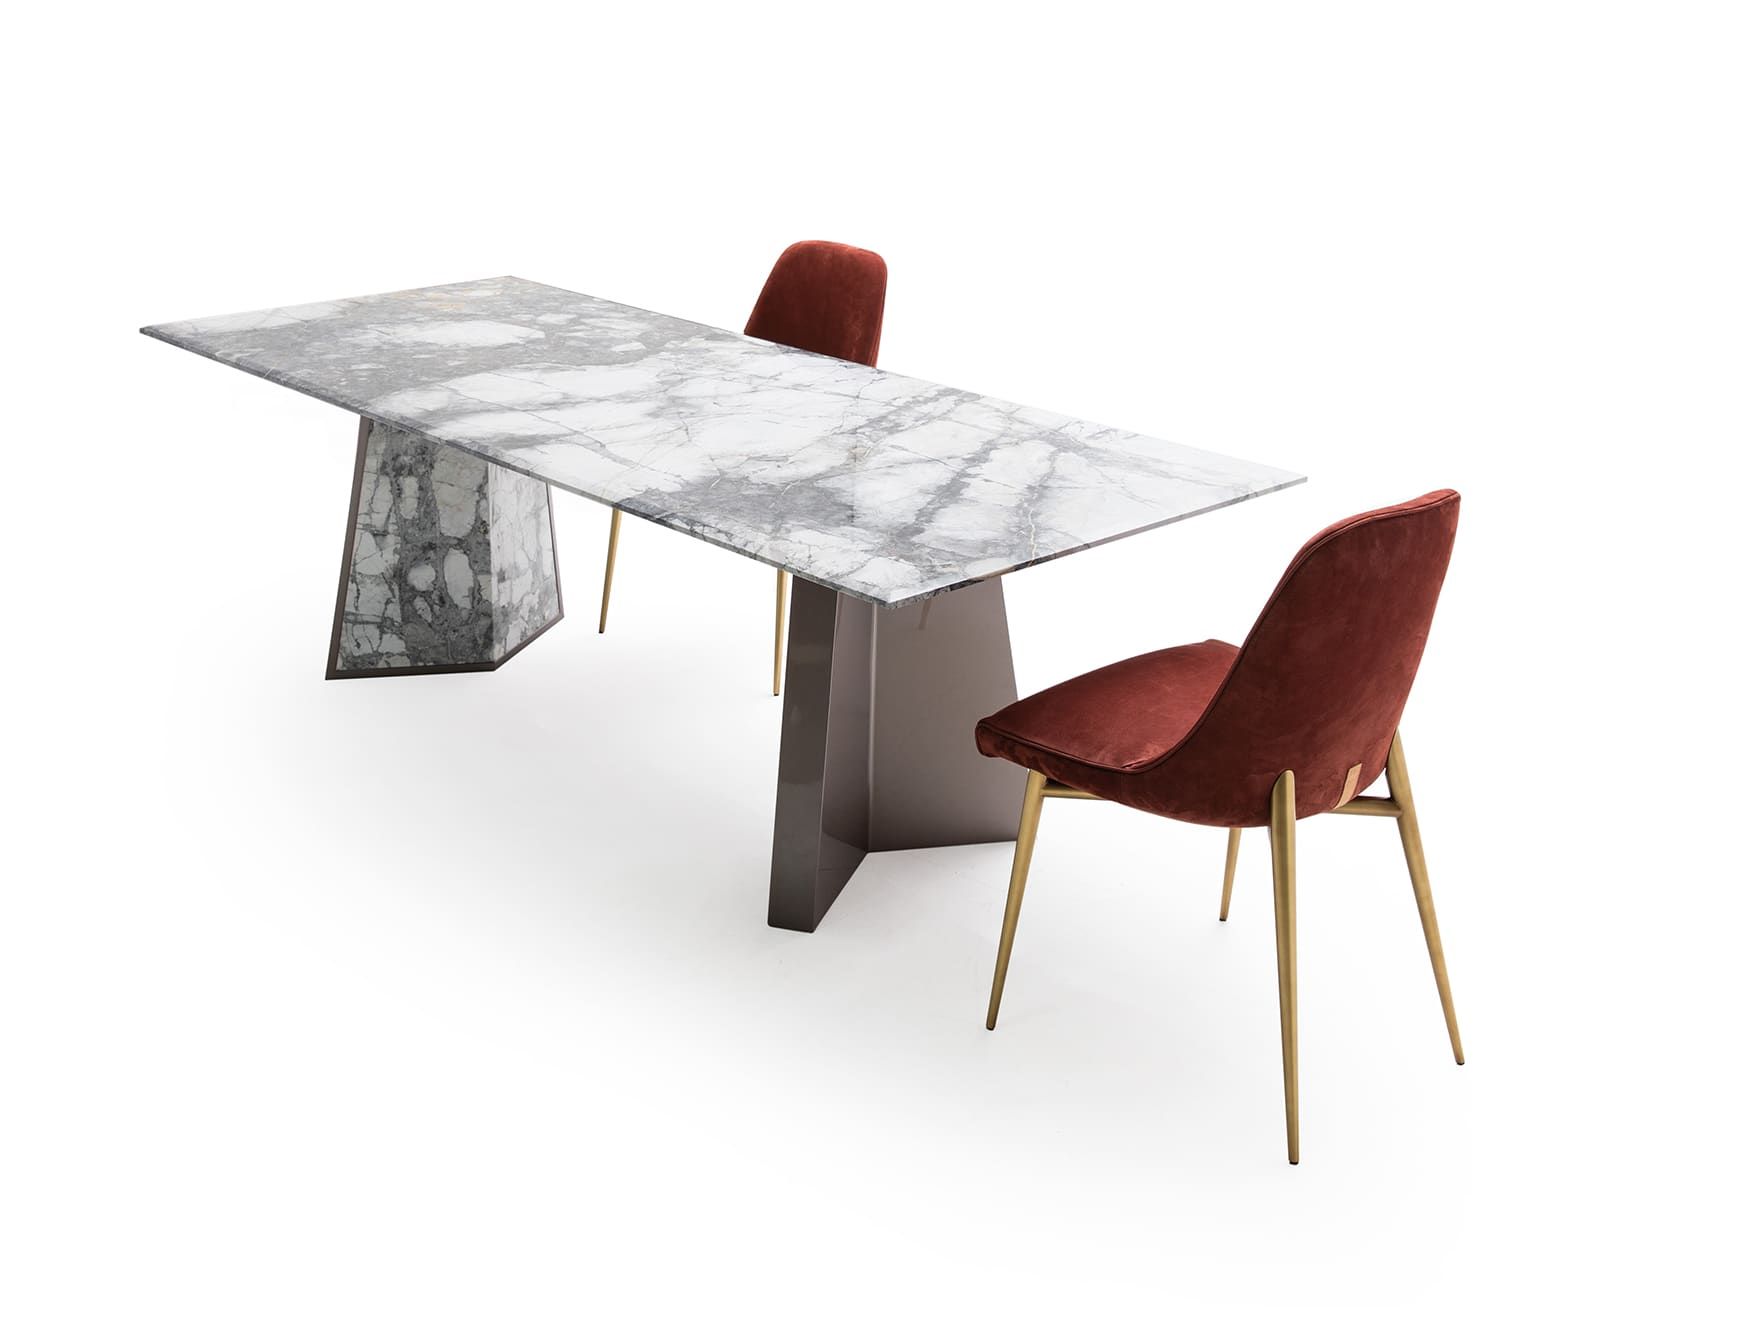 Vendome modern Italian table with grey Invisible marble